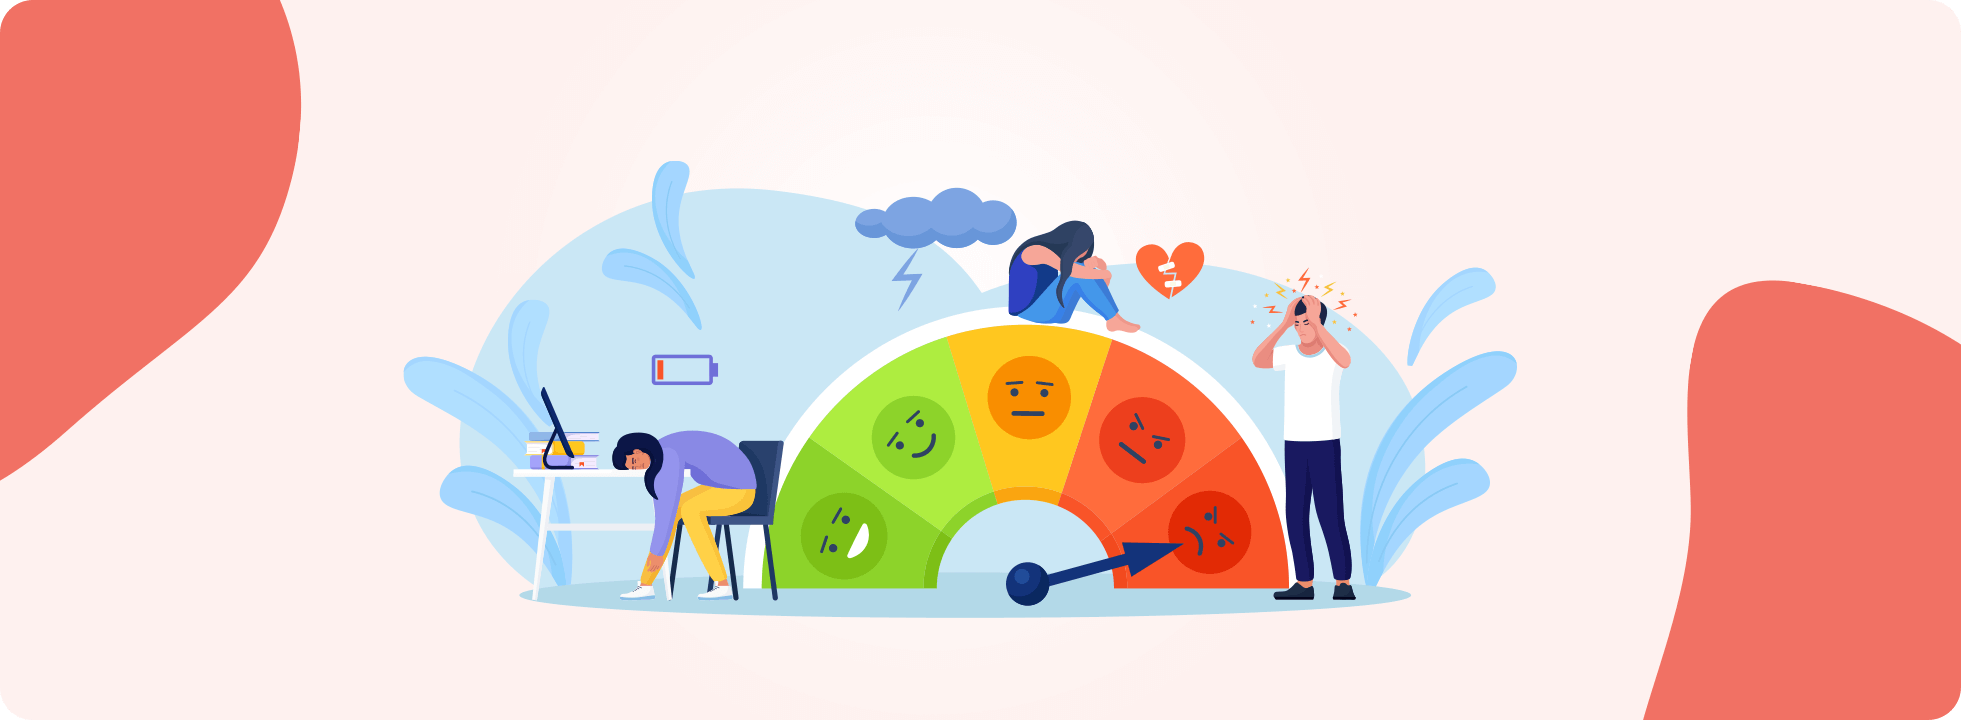 A cartoon illustration of unhappy office workers around a 'happiness meter' indicating unhappiness.